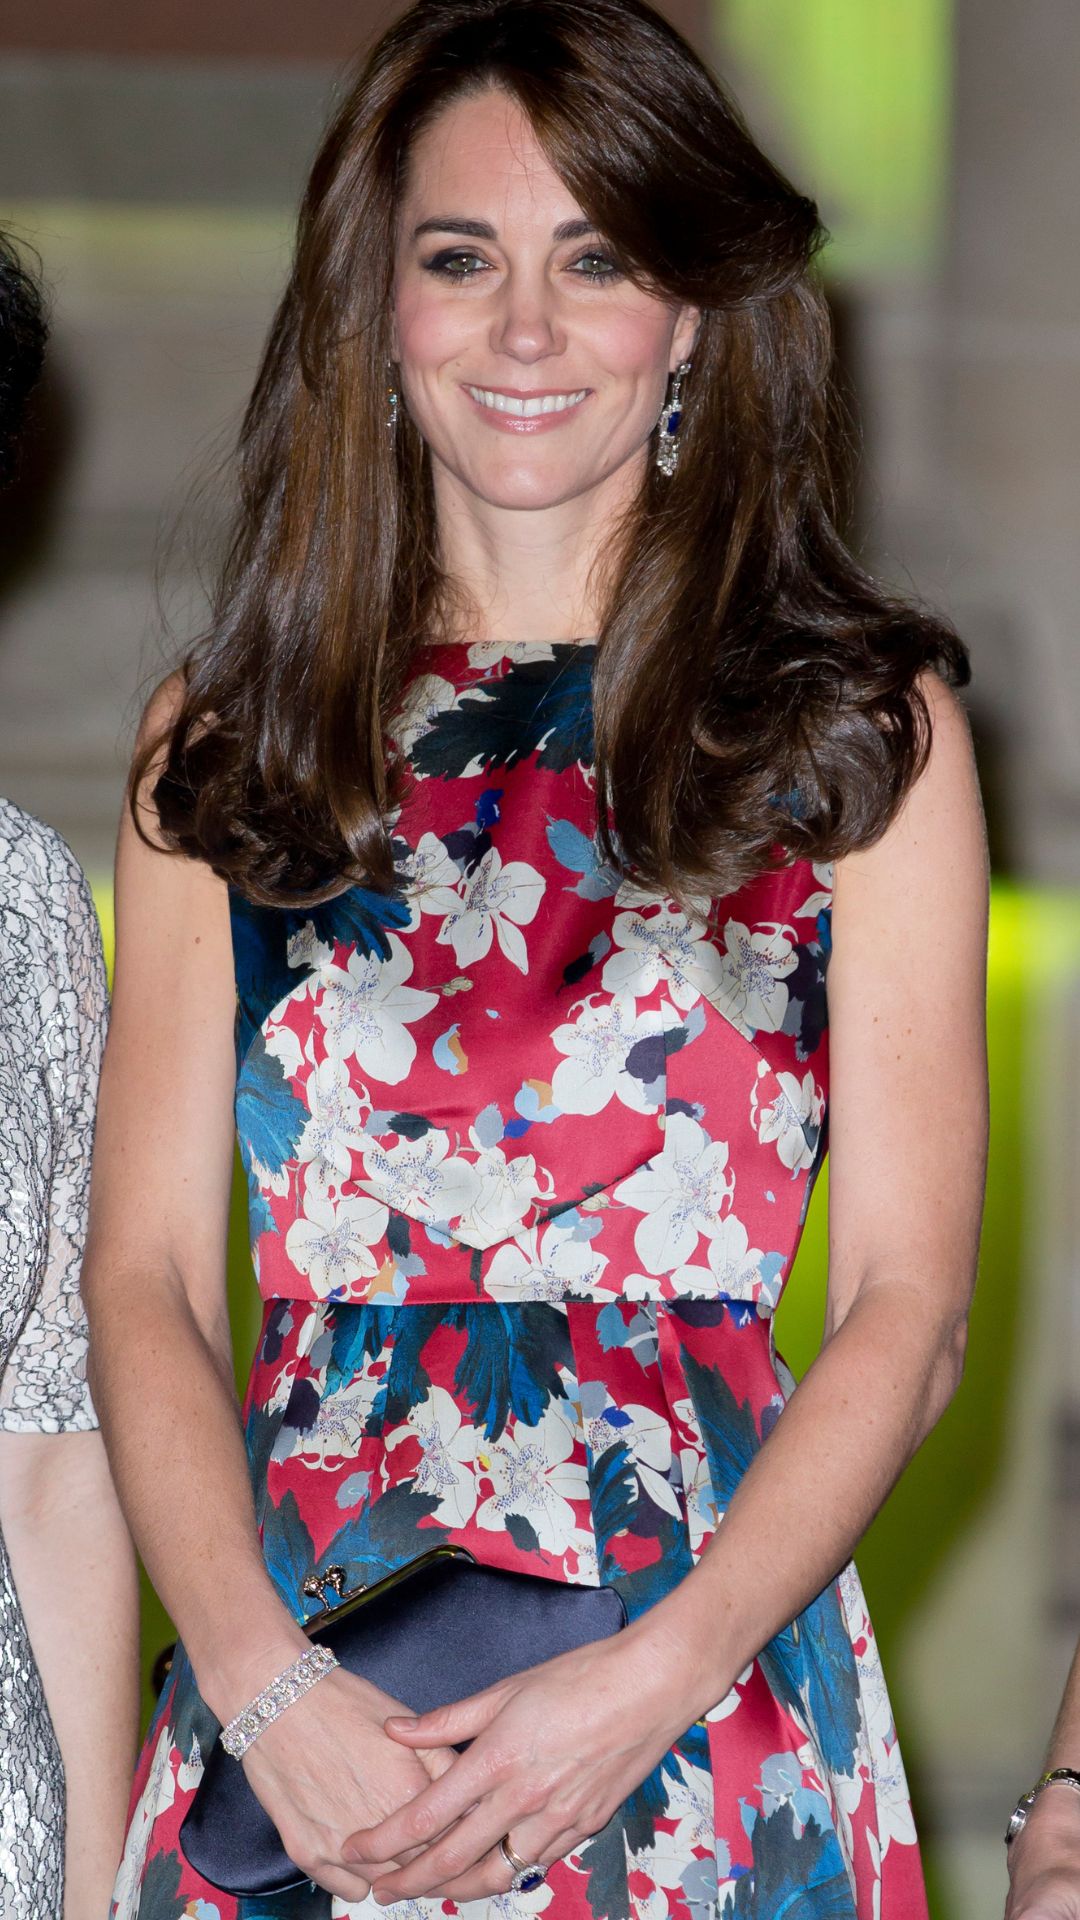 Kate Middleton debuted curtain bangs and the most…